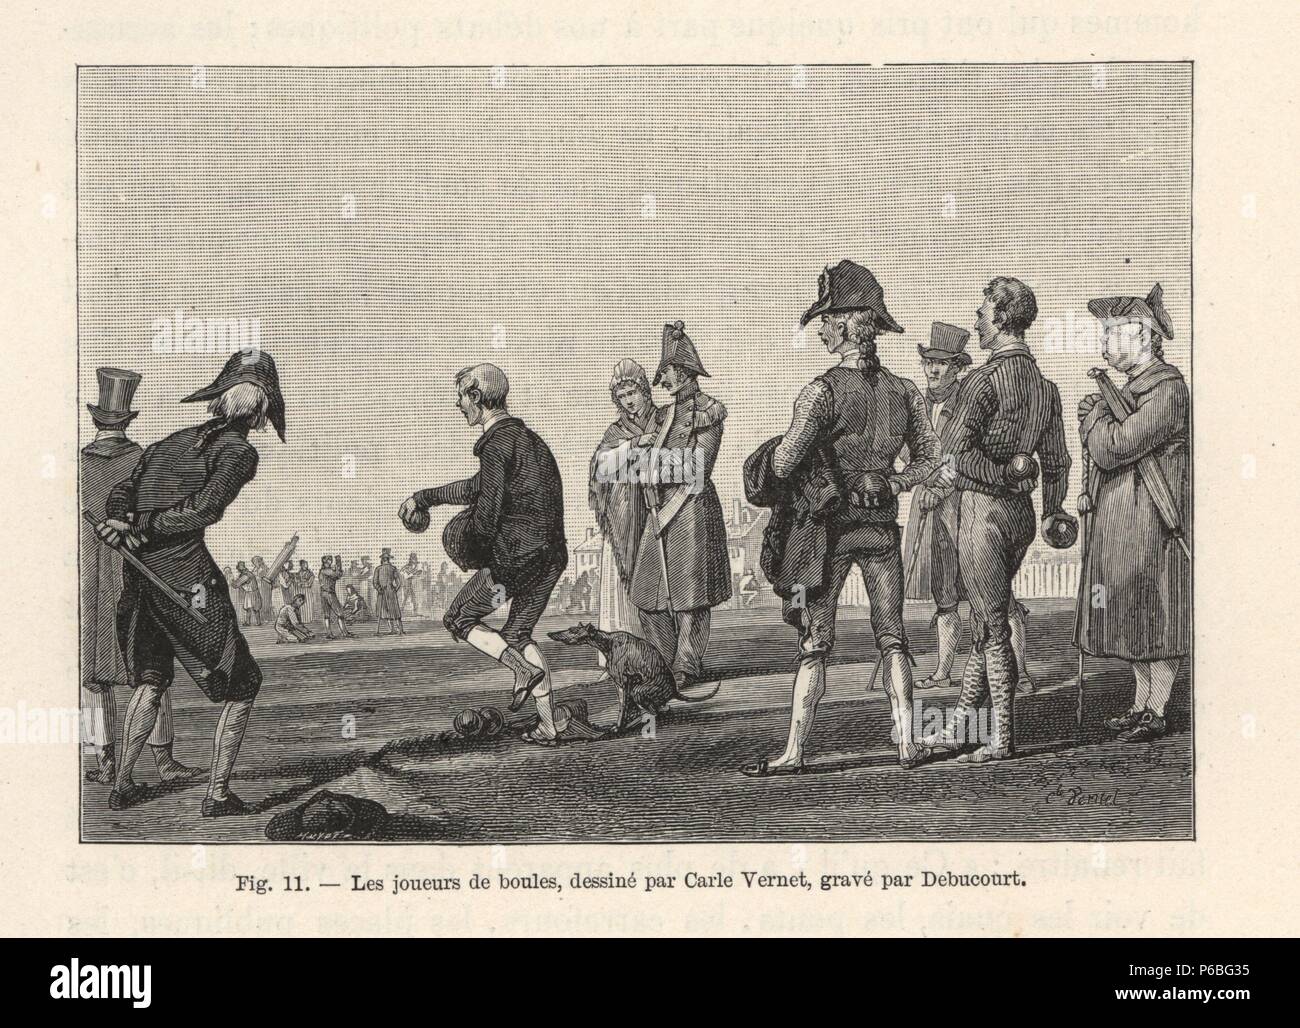 Parisians playing a game of boules, circa 1800, in a park with soldiers and other men watching. Illustration drawn by Carle Vernet, woodcut by Debucourt from Paul Lacroix's 'Directoire, Consulat et Empire,' Paris, 1884. Stock Photo